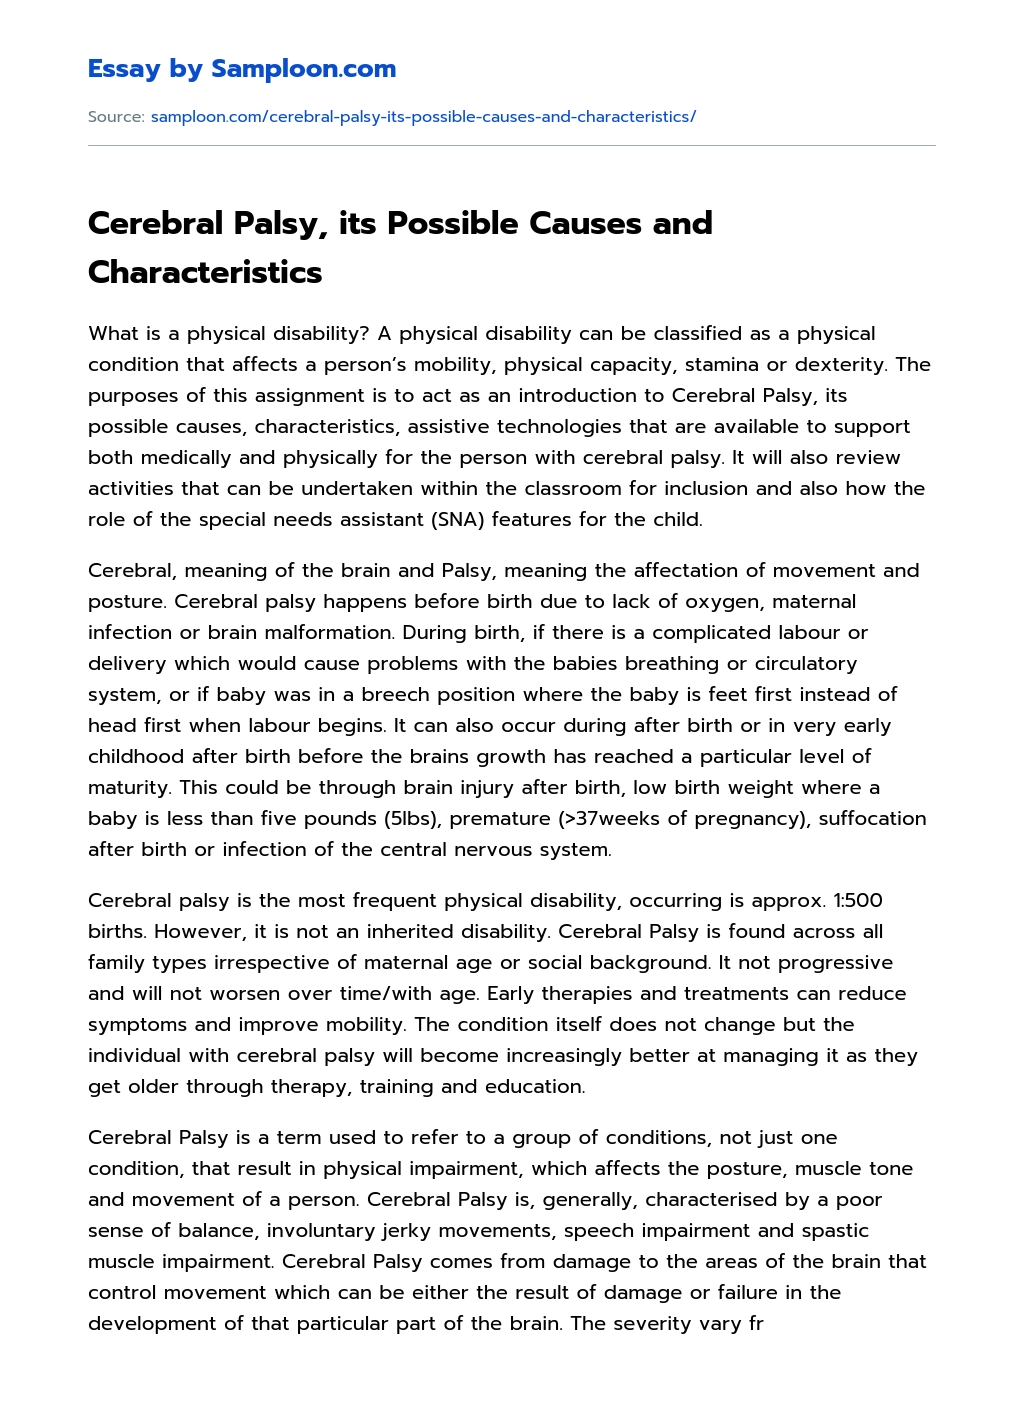 Cerebral Palsy, its Possible Causes and Characteristics essay